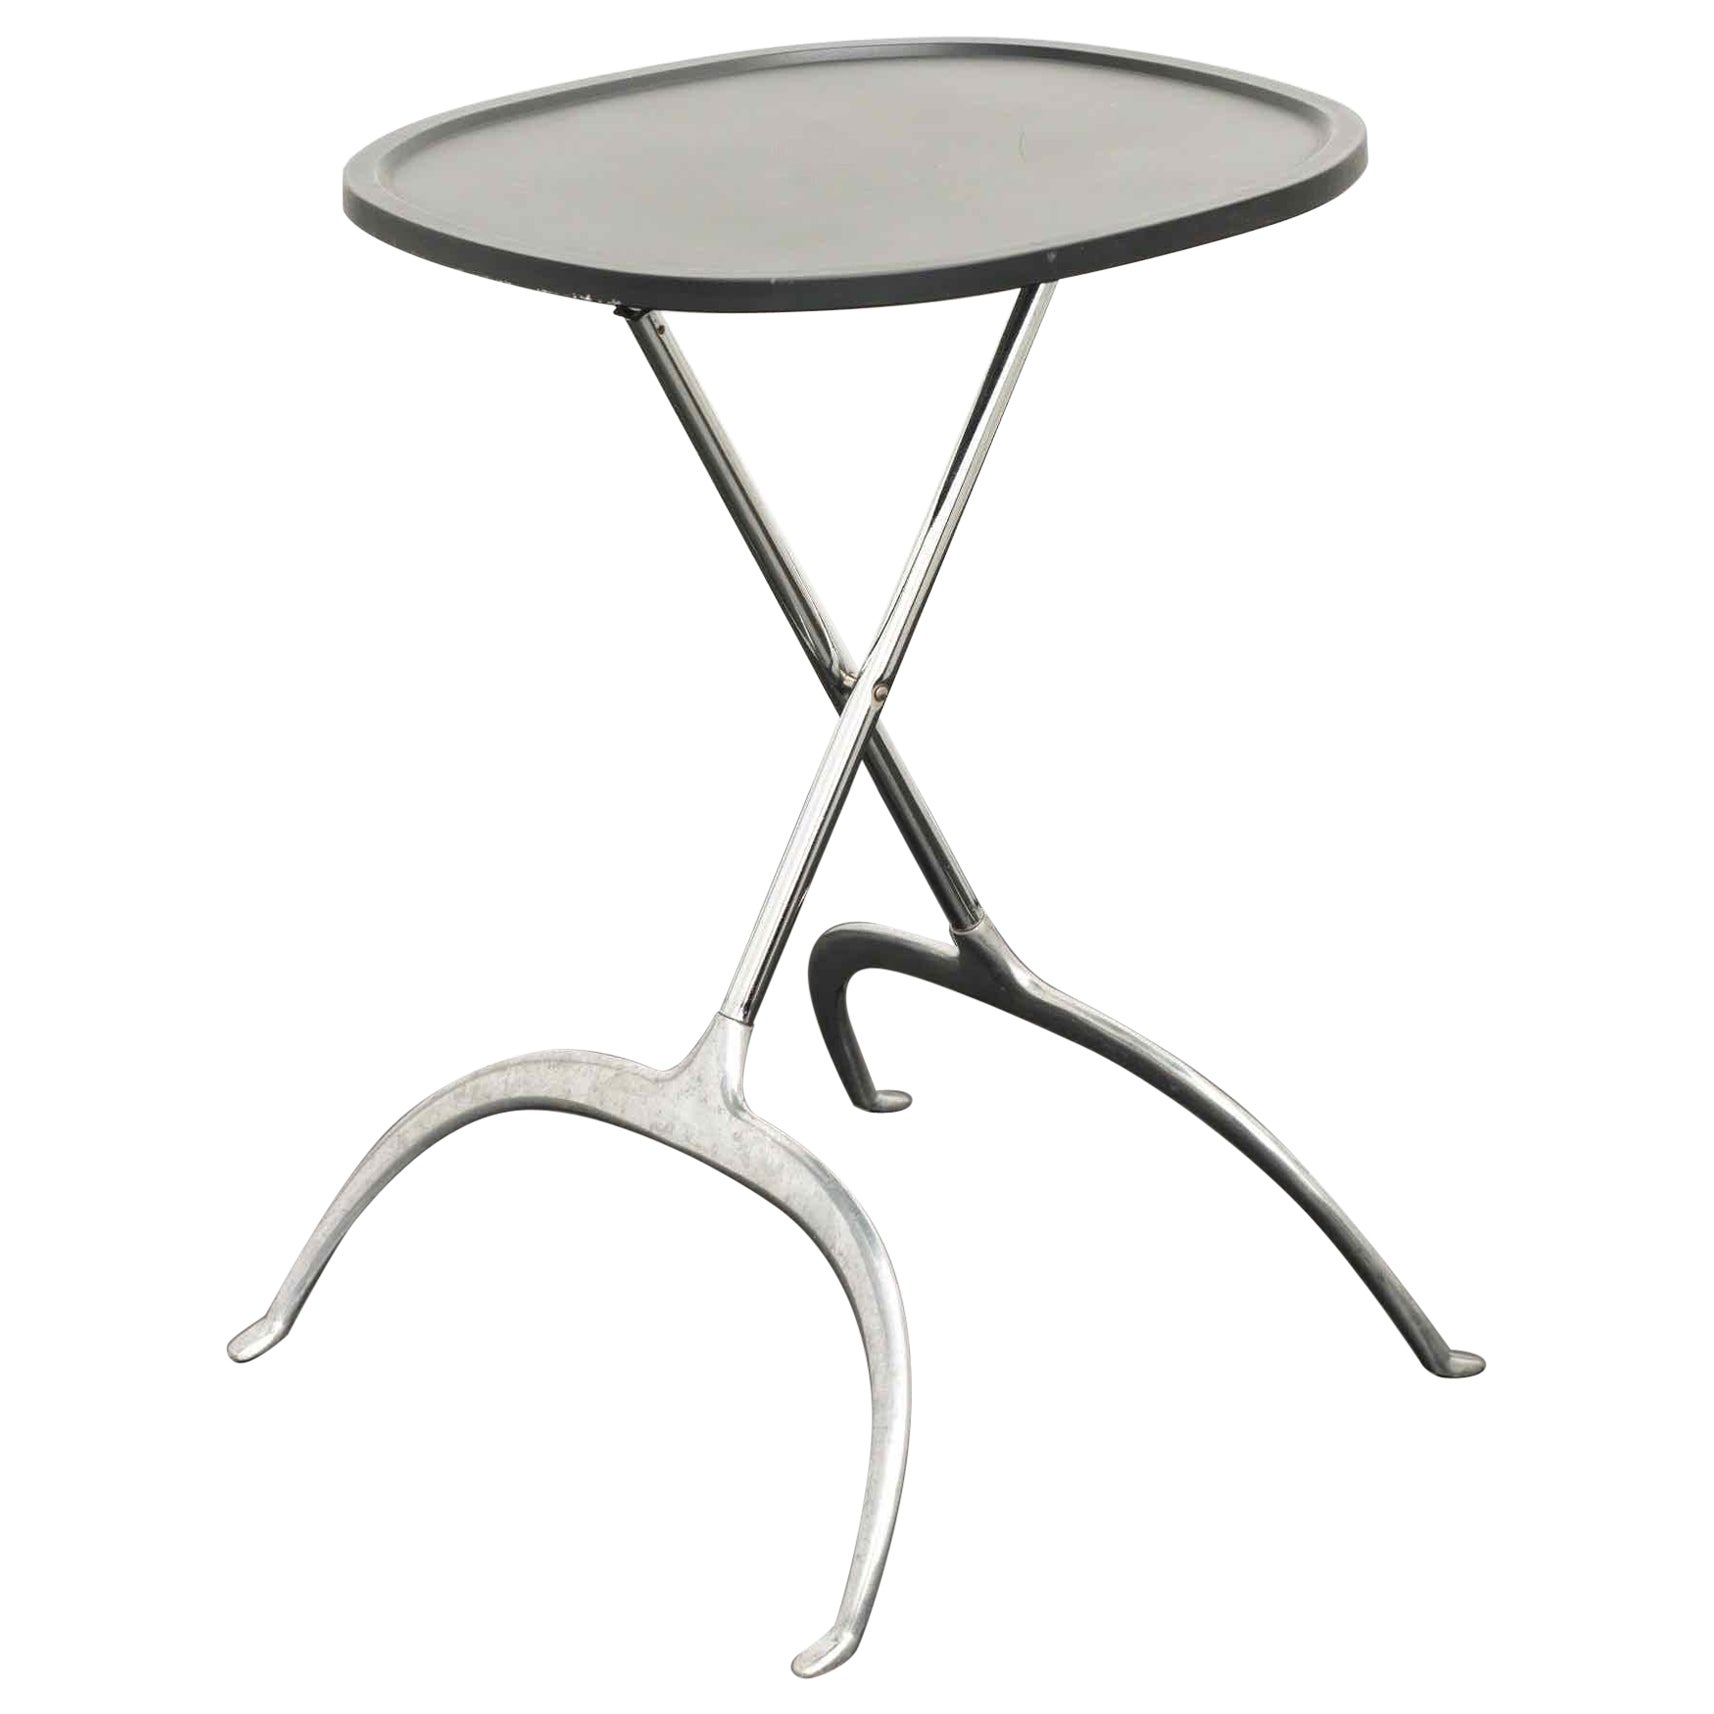 by table and \'Leopoldo\' at folding For Oliver 19990s Citterio Glen Sale 1stDibs Löw, Kartell Antonio